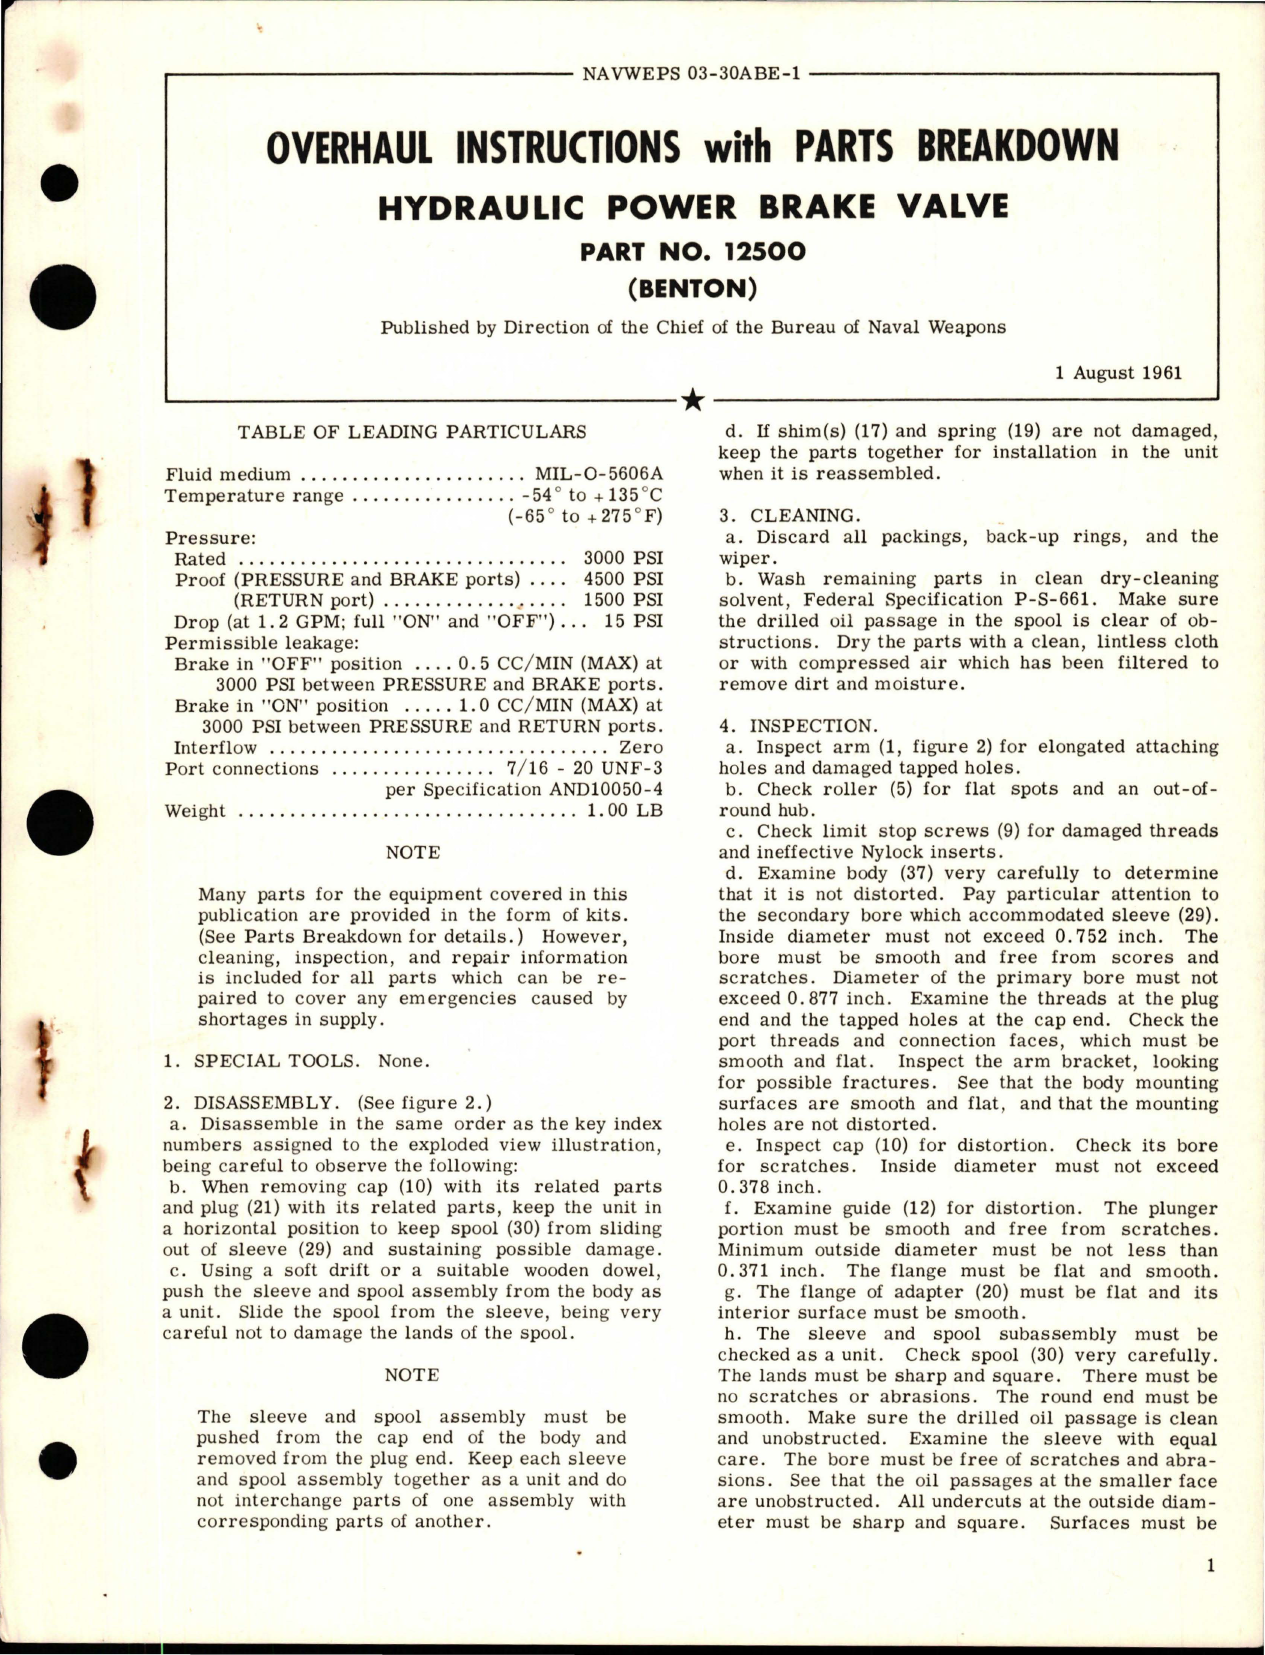 Sample page 1 from AirCorps Library document: Overhaul Instructions with Parts Breakdown for Hydraulic Power Brake Valve - Part 12500